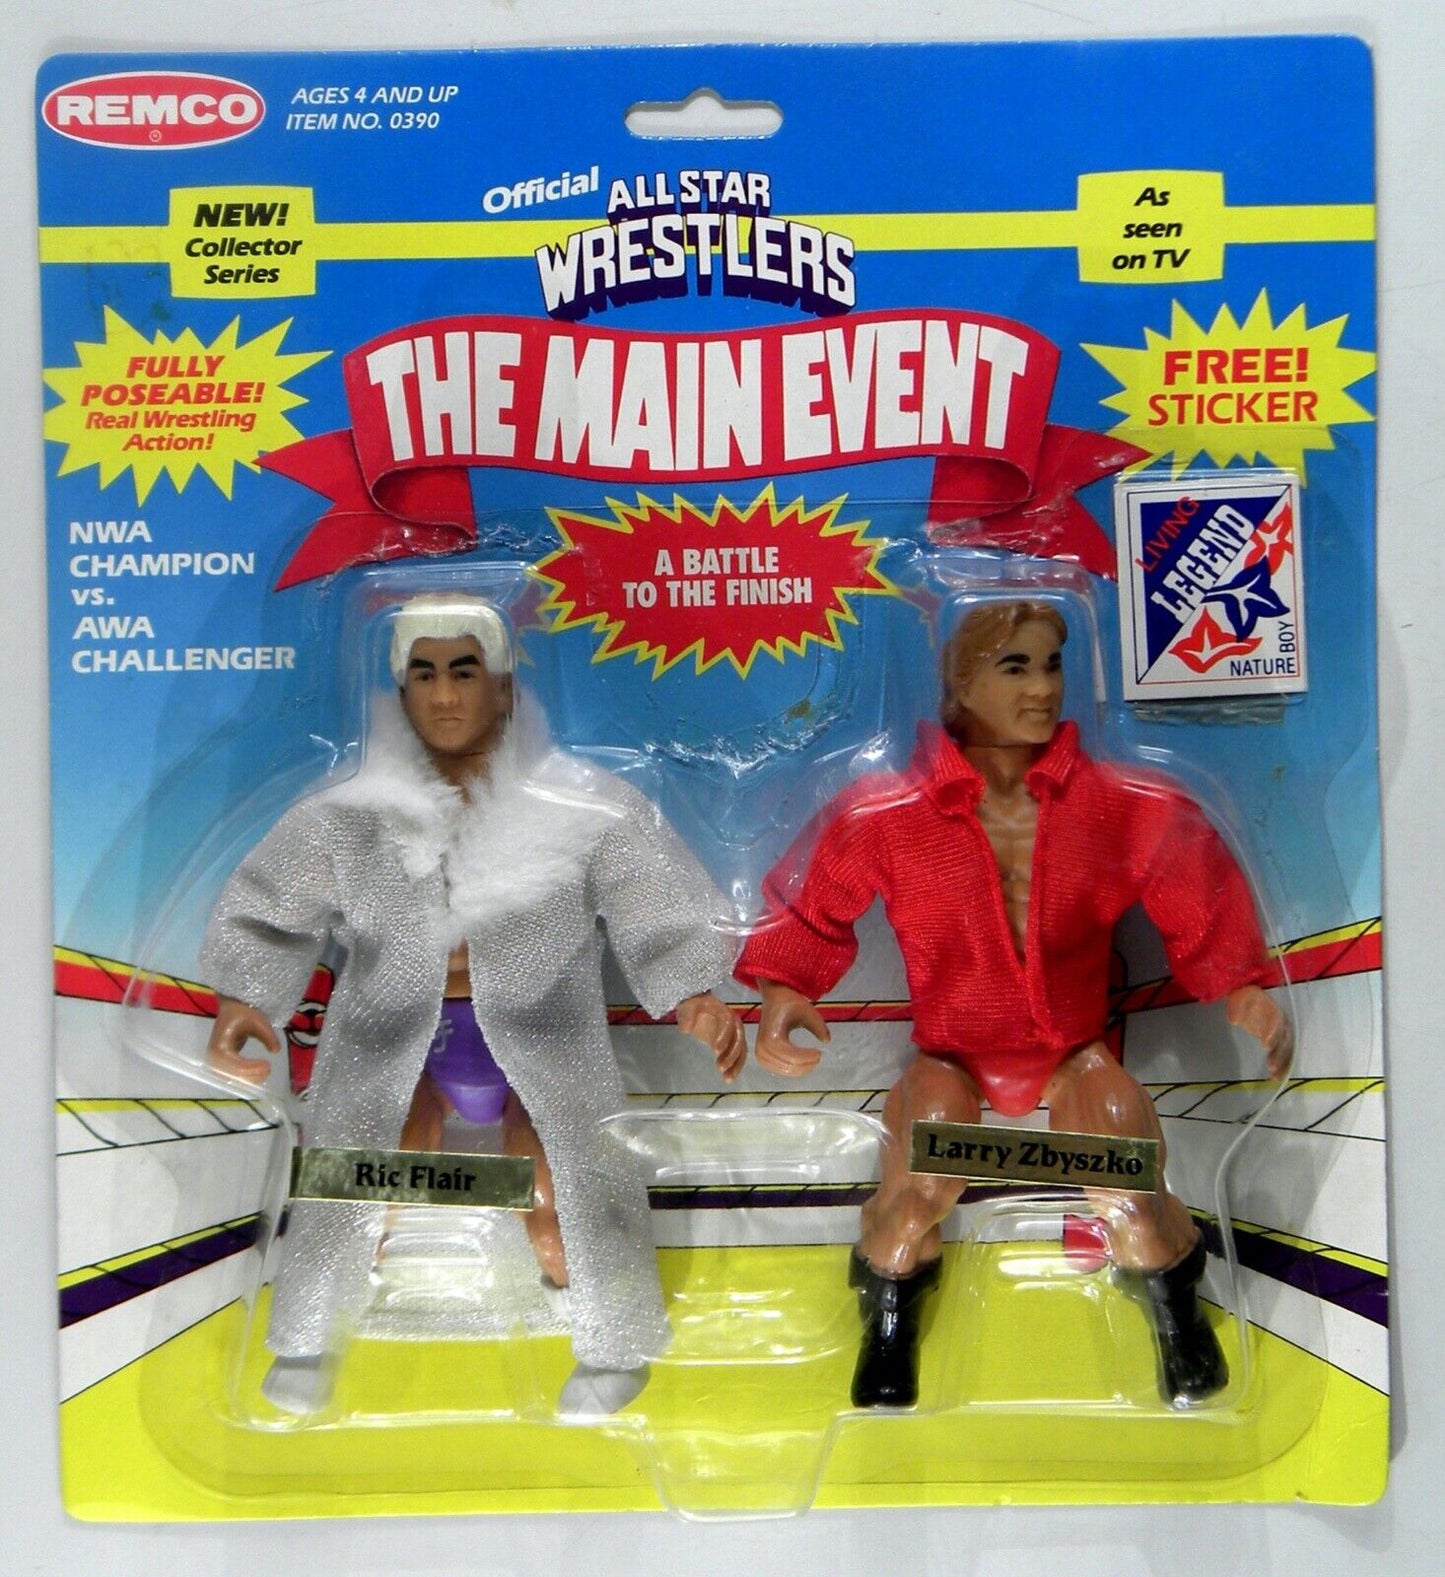 1985 AWA Remco All Star Wrestlers Series 2 Ric Flair vs. Larry Zbyszko [With Soft Head]